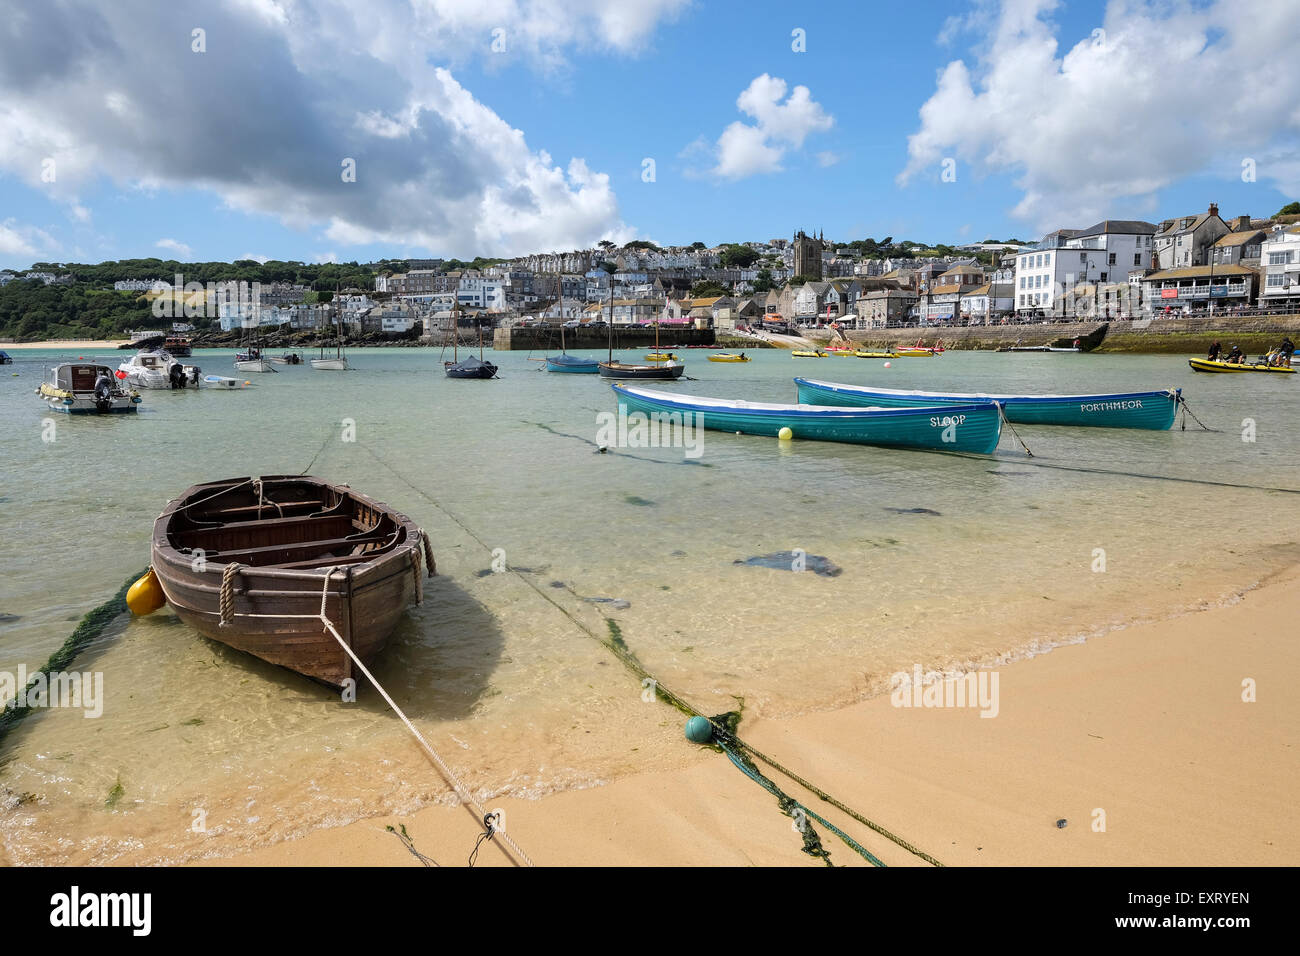 St Ives, Cornwall, UK:  Wooden rowing boat and Gig rowing boats in St Ives harbour with beach in foreground. Stock Photo